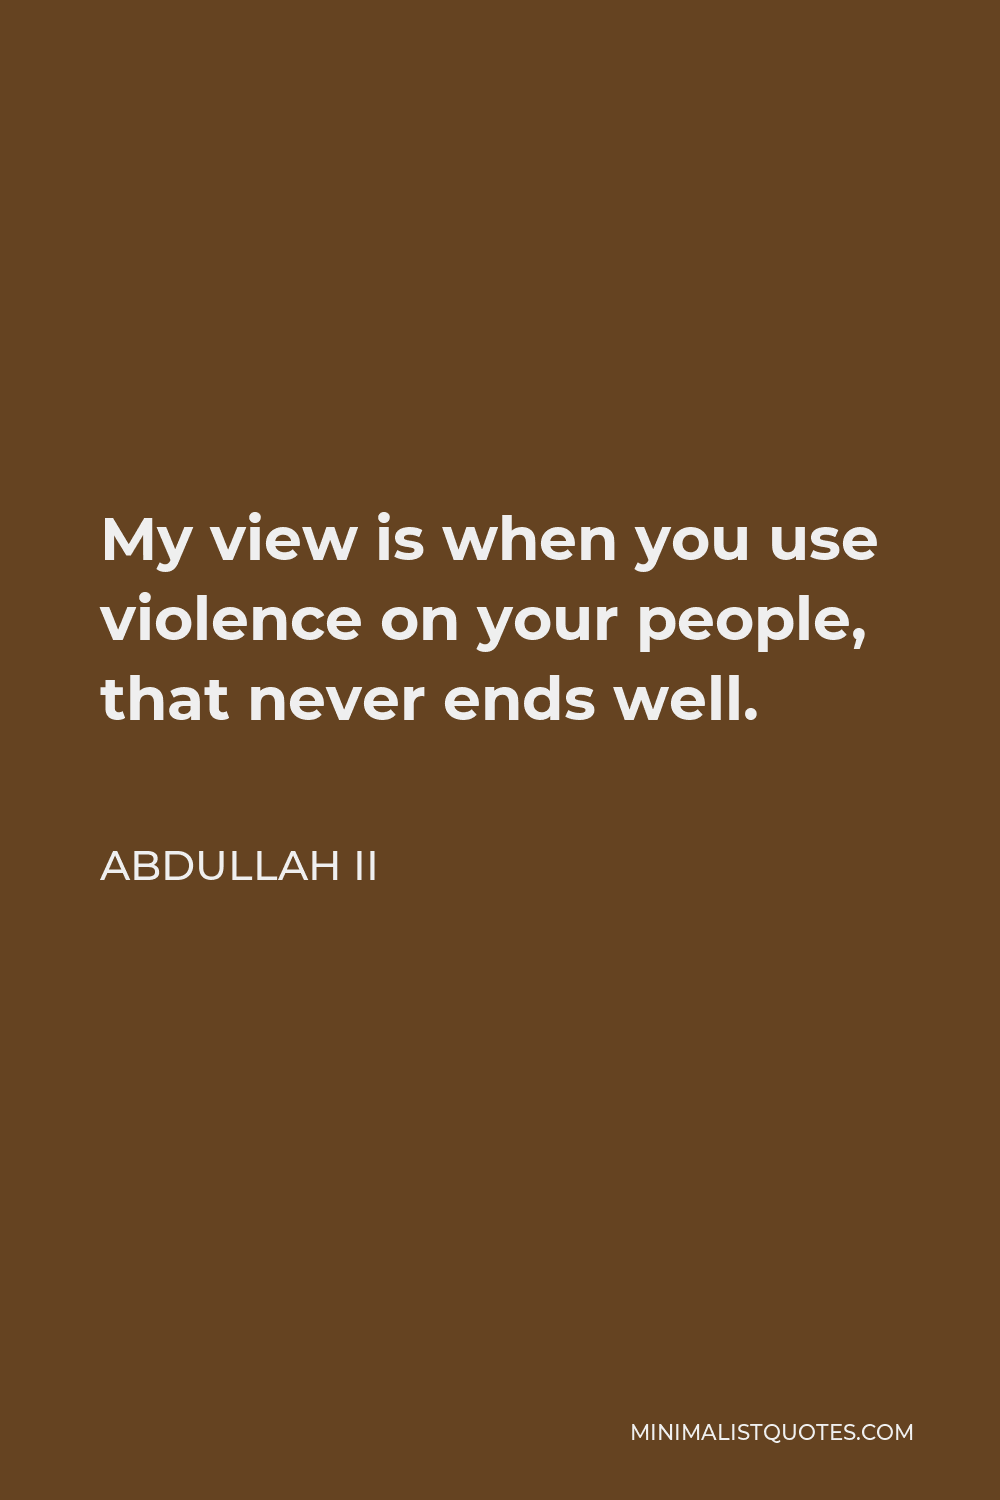 Abdullah II Quote - My view is when you use violence on your people, that never ends well.